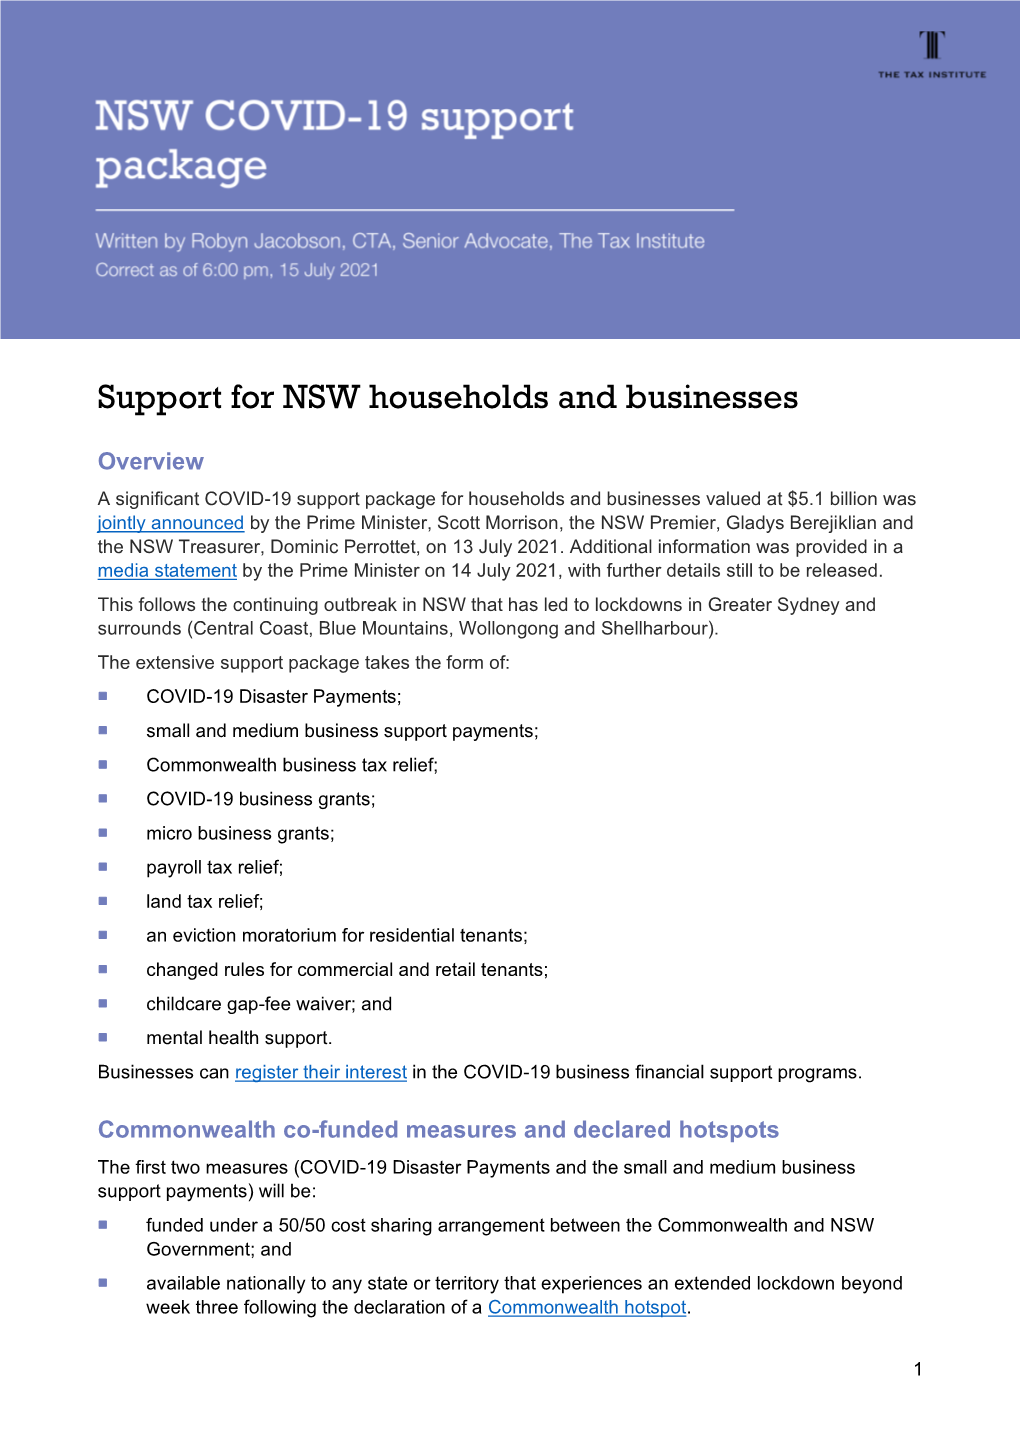 Support for NSW Households and Businesses